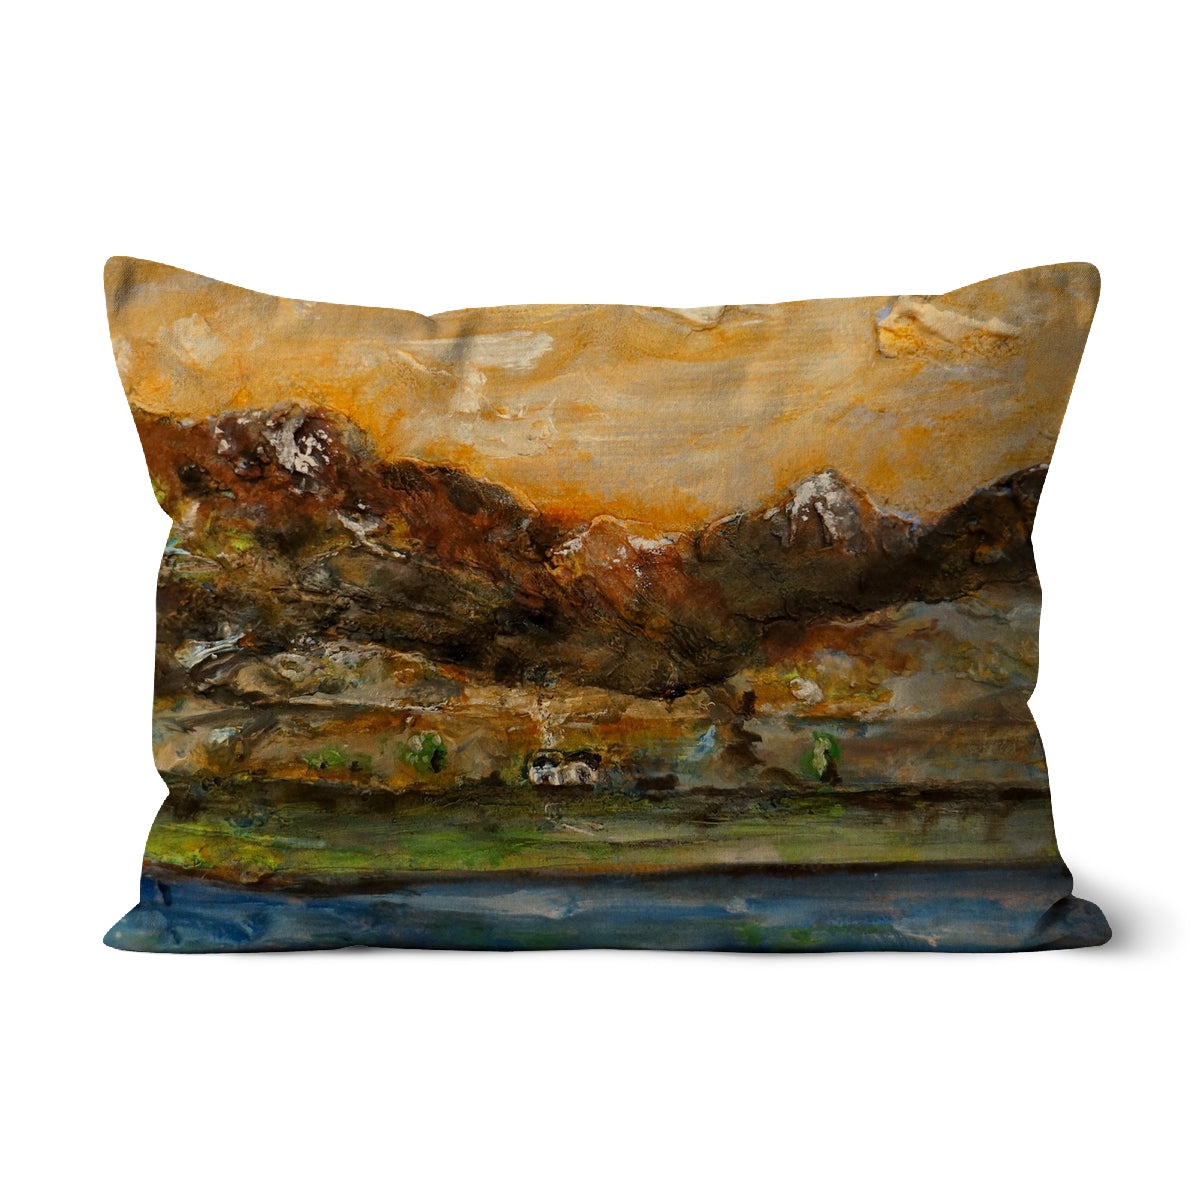 A Glencoe Cottage Art Gifts Cushion-Cushions-Glencoe Art Gallery-Faux Suede-19"x13"-Paintings, Prints, Homeware, Art Gifts From Scotland By Scottish Artist Kevin Hunter